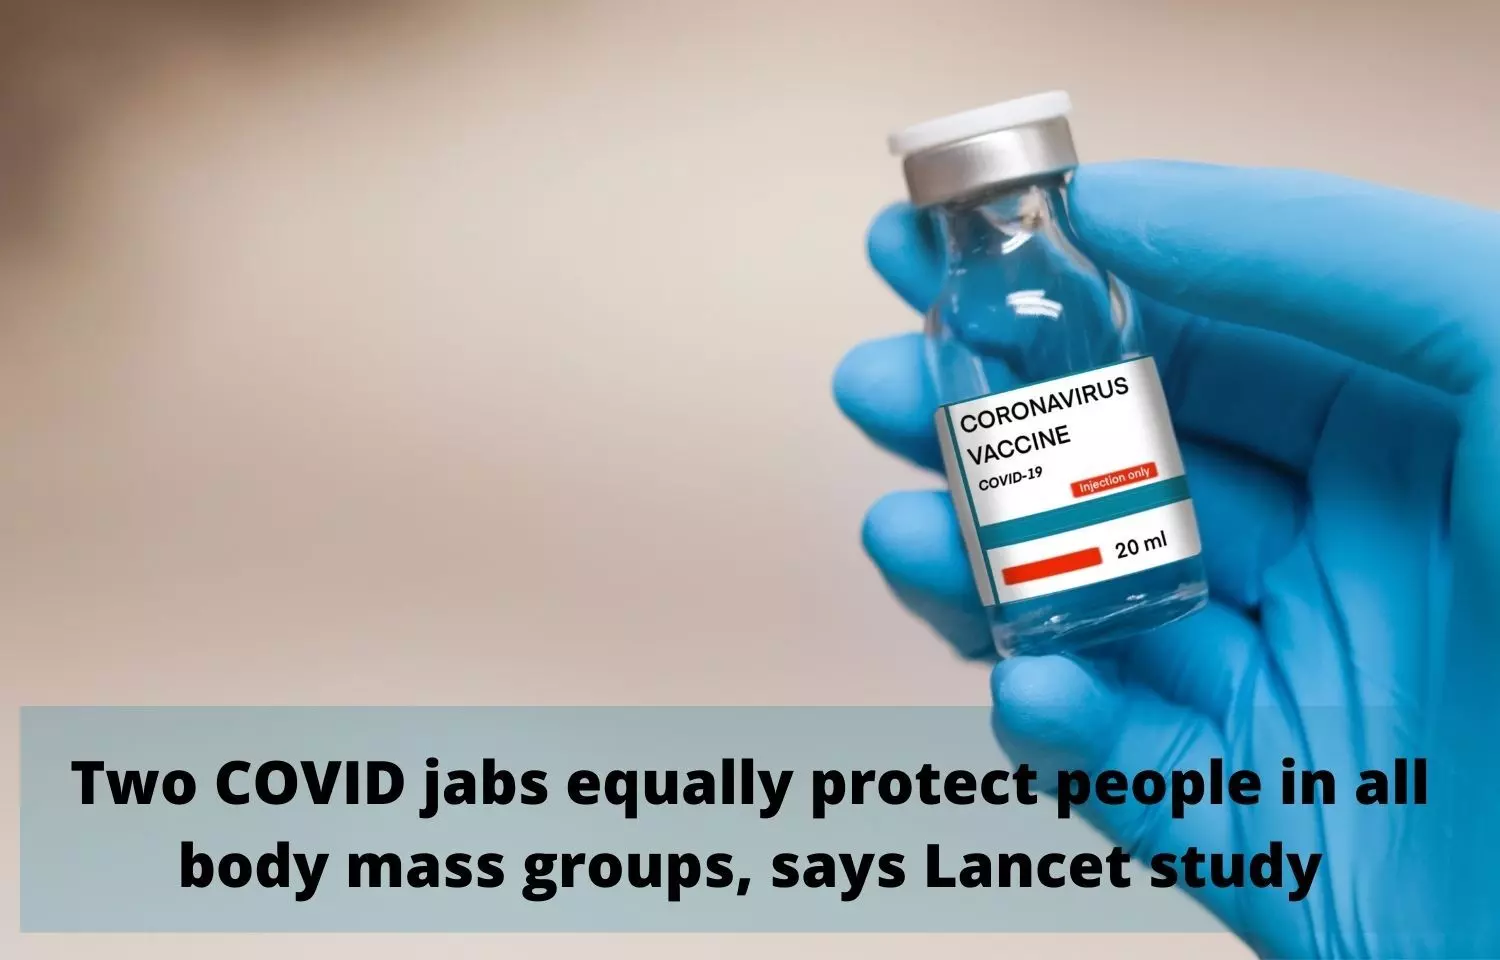 Two COVID jabs equally protect people in all body mass groups, says Lancet study